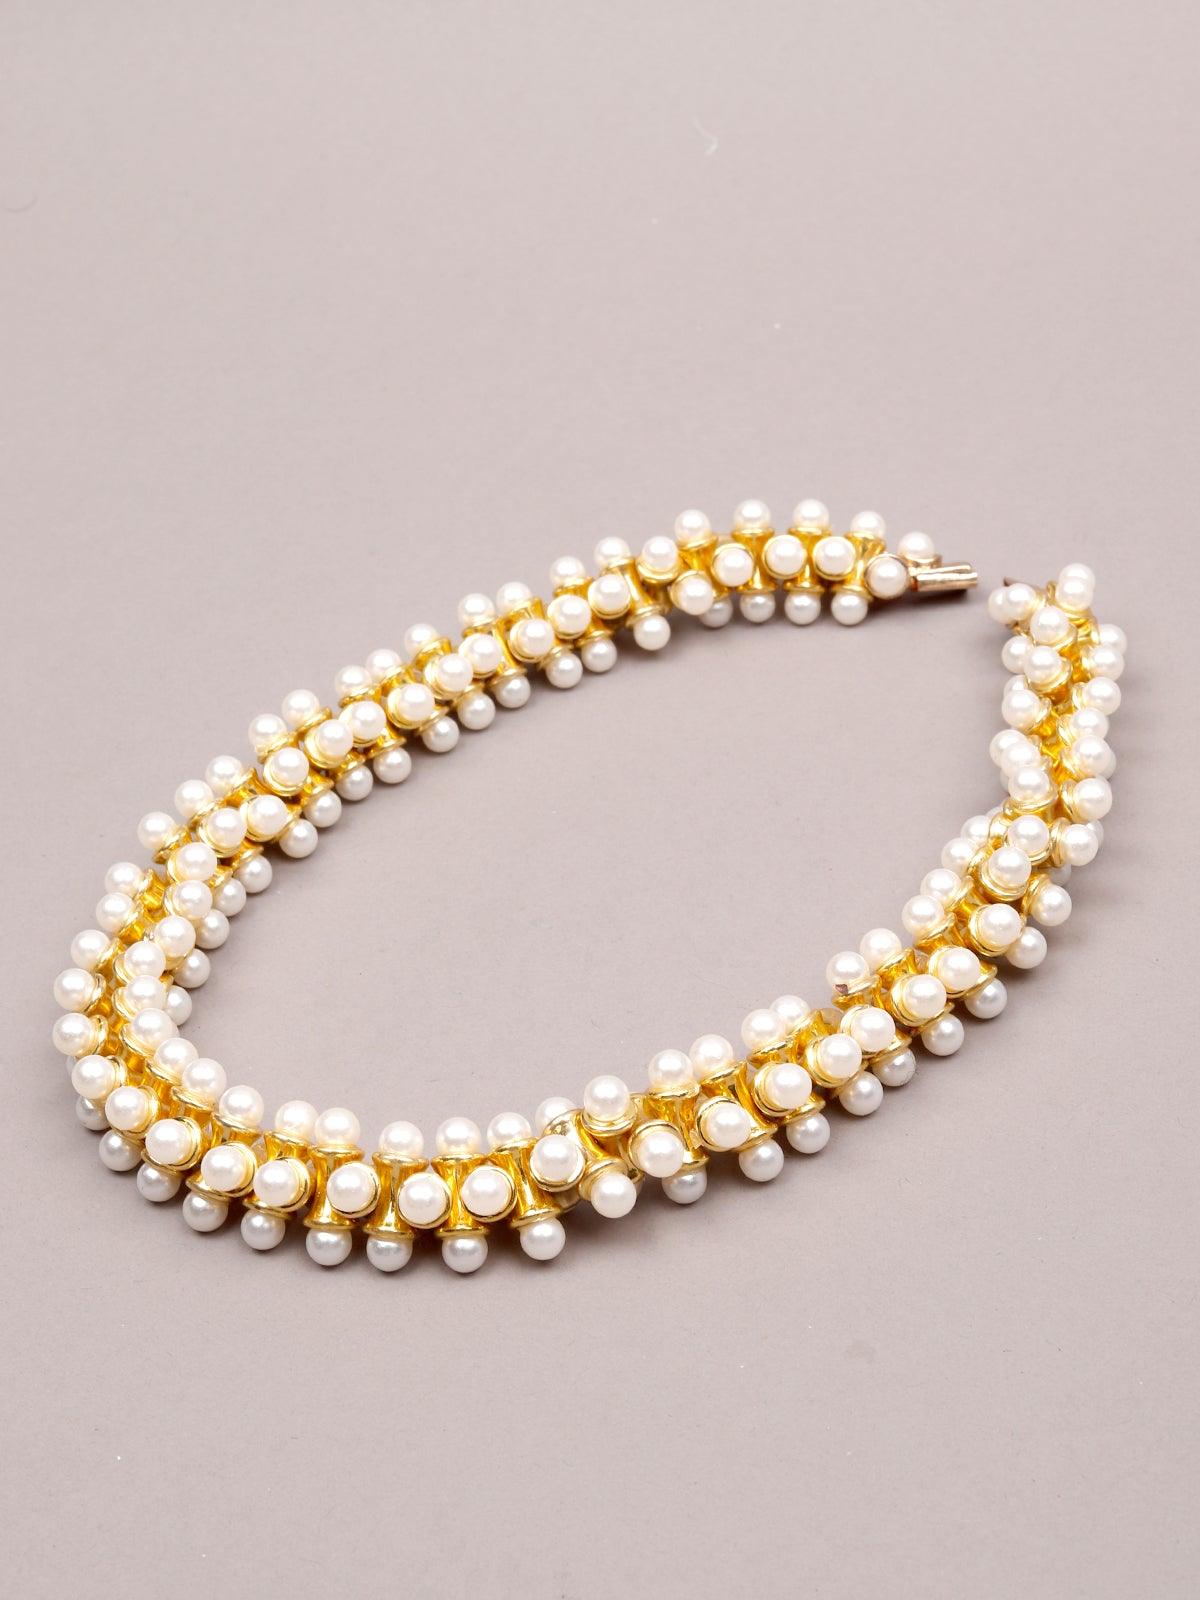 Women's Exquisite Gold-Tone Pearl Embellished Necklace - Odette